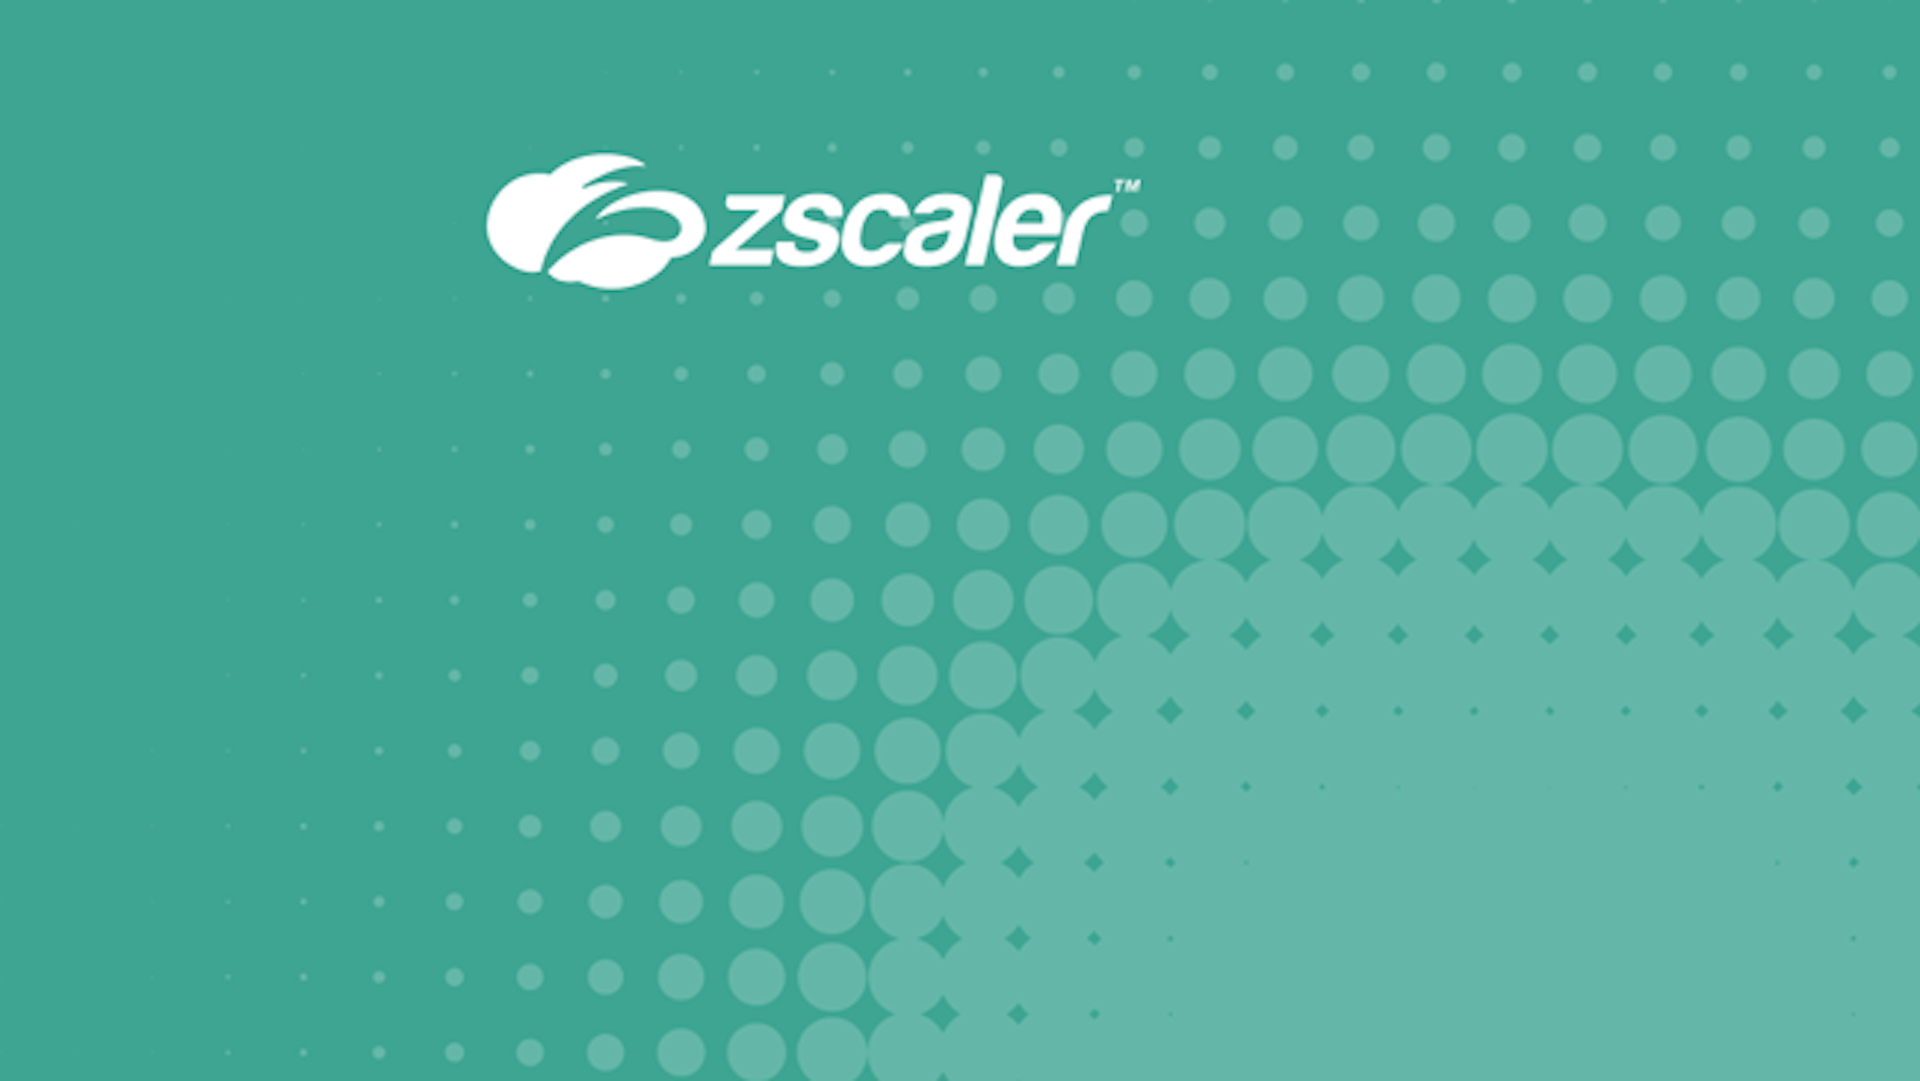 Case Study Clip: Zscaler Secures SAP Access for GROWMARK